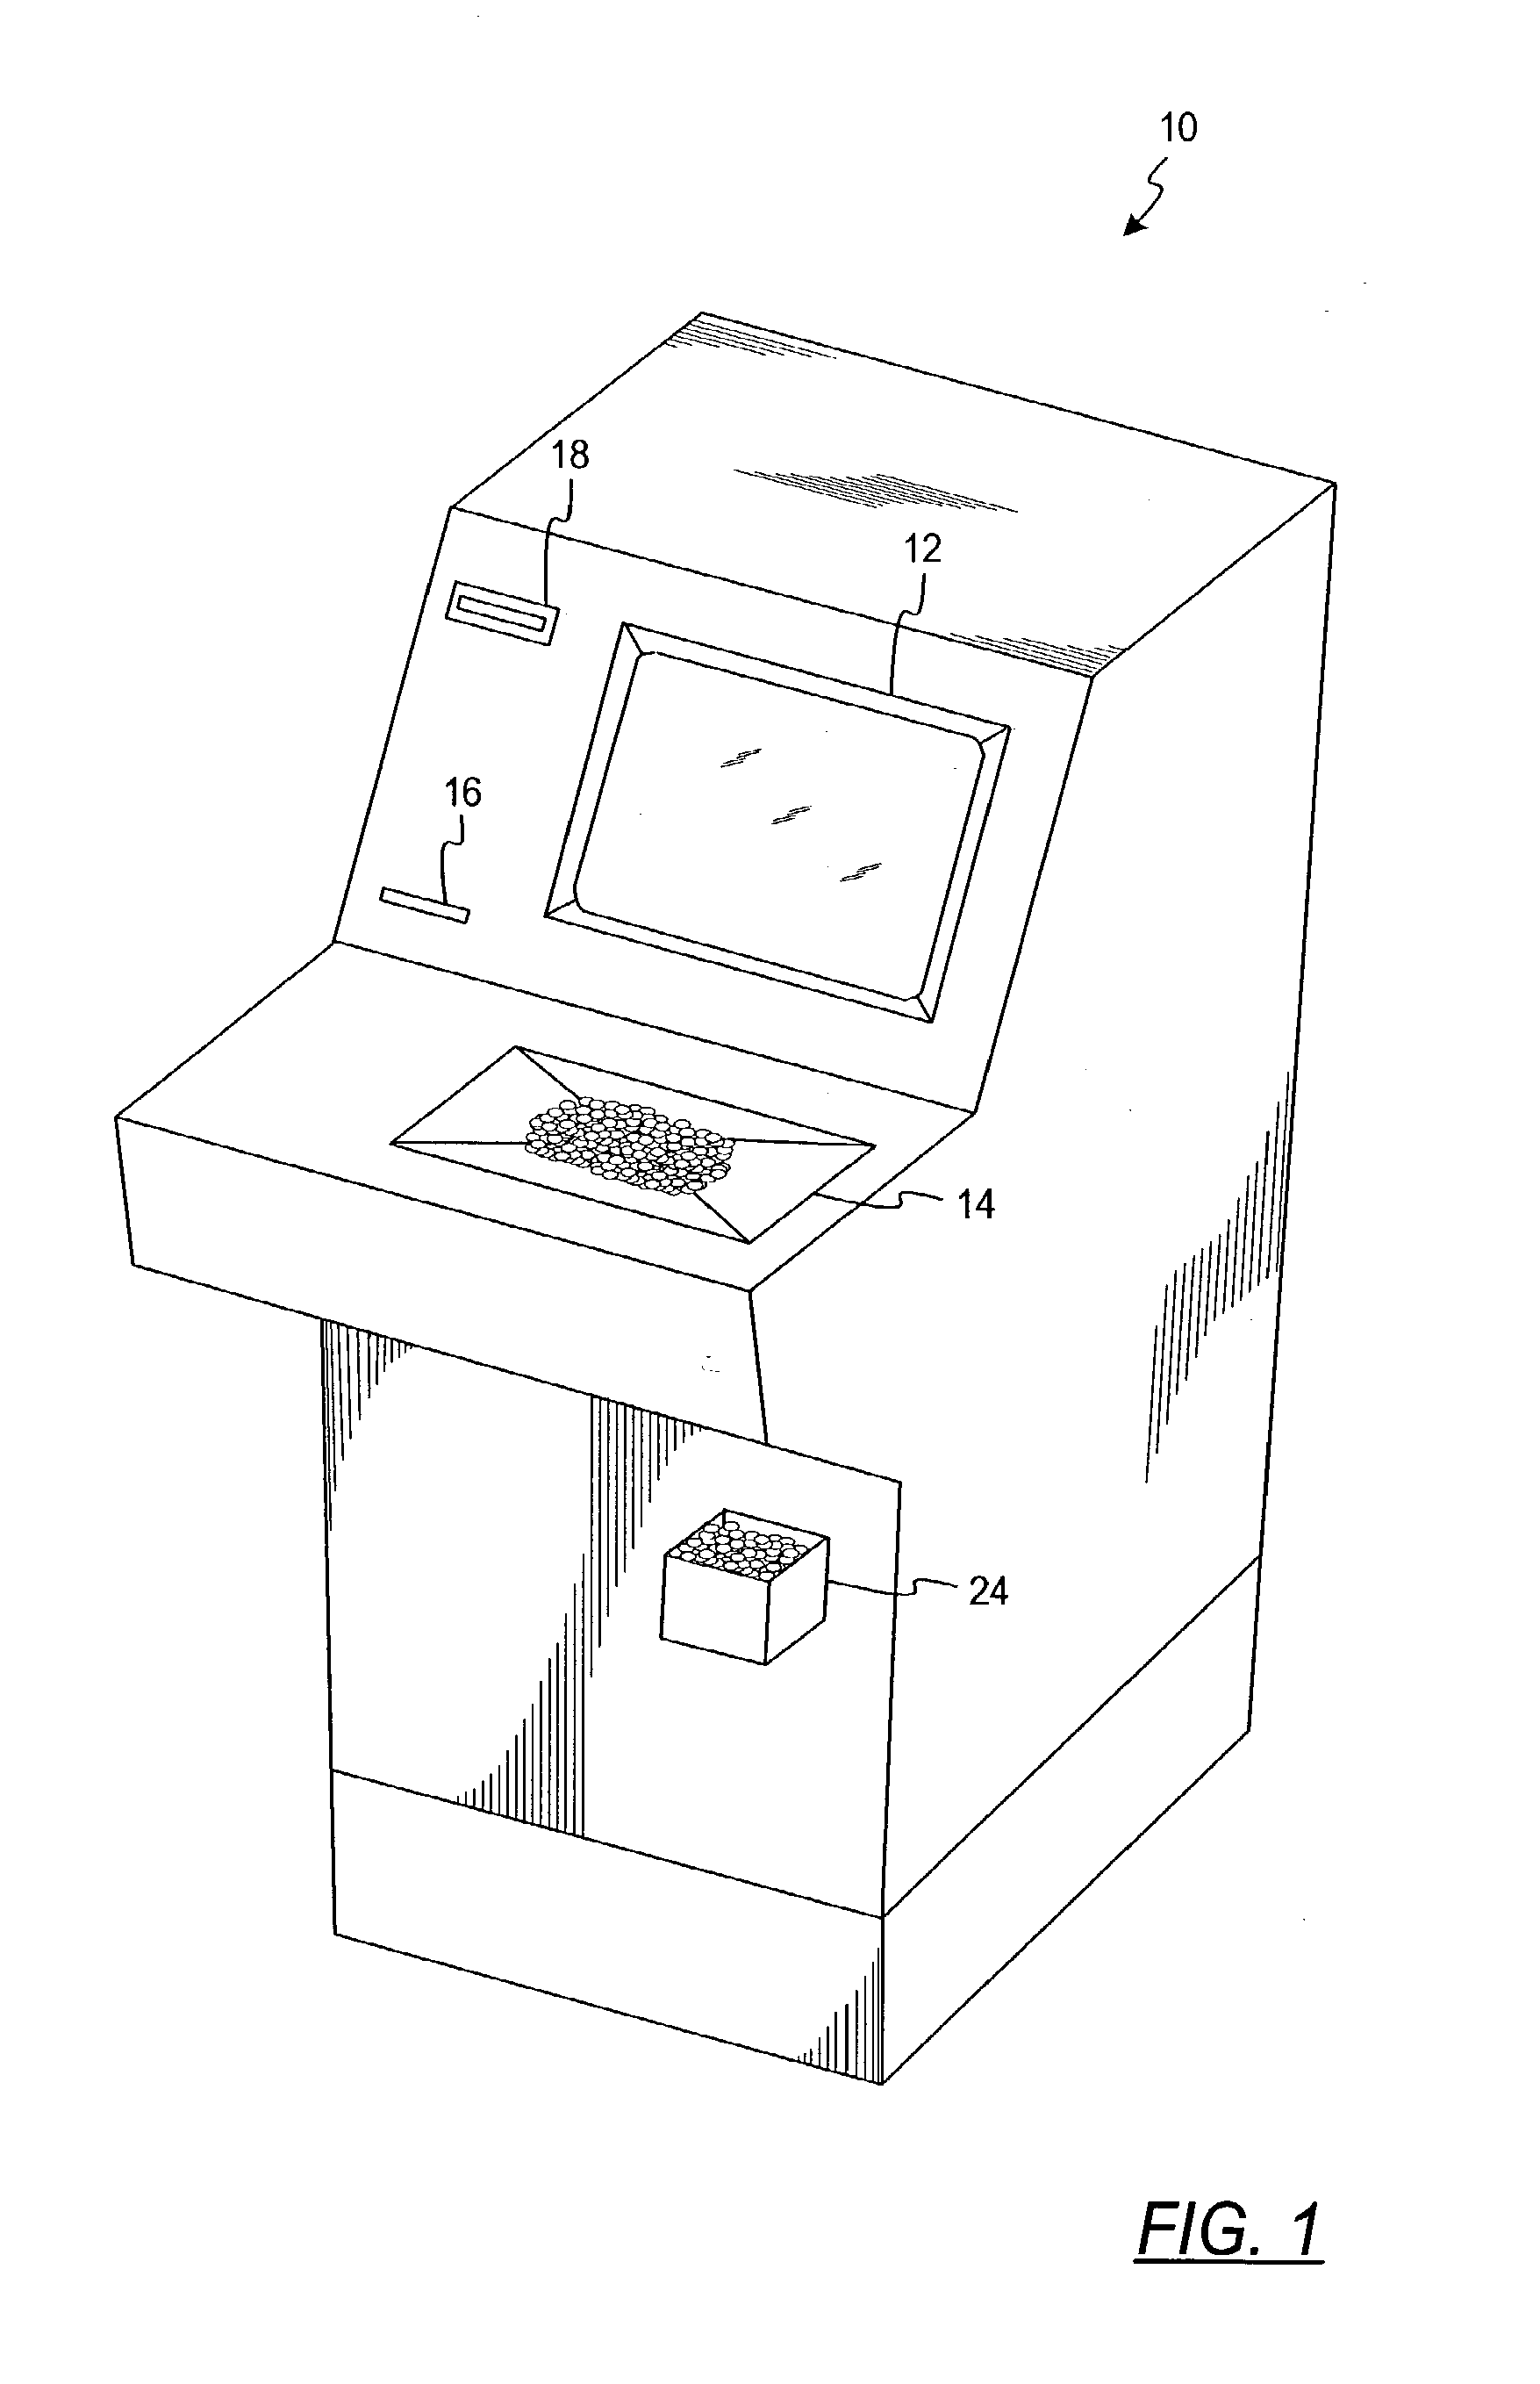 Coin redemption machine having gravity feed coin input tray and foreign object detection system